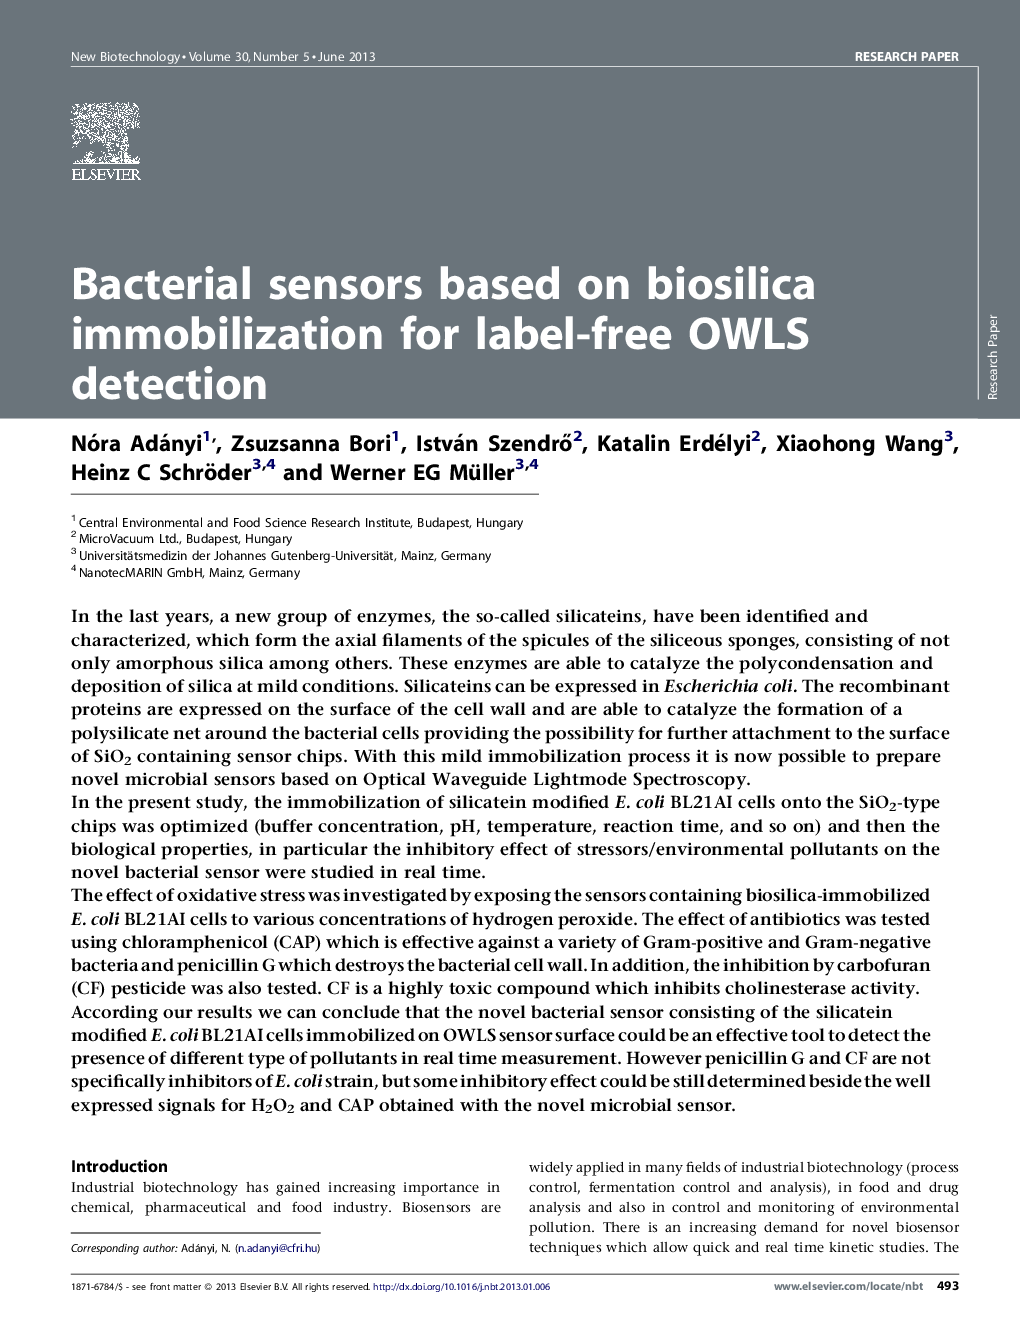 Bacterial sensors based on biosilica immobilization for label-free OWLS detection